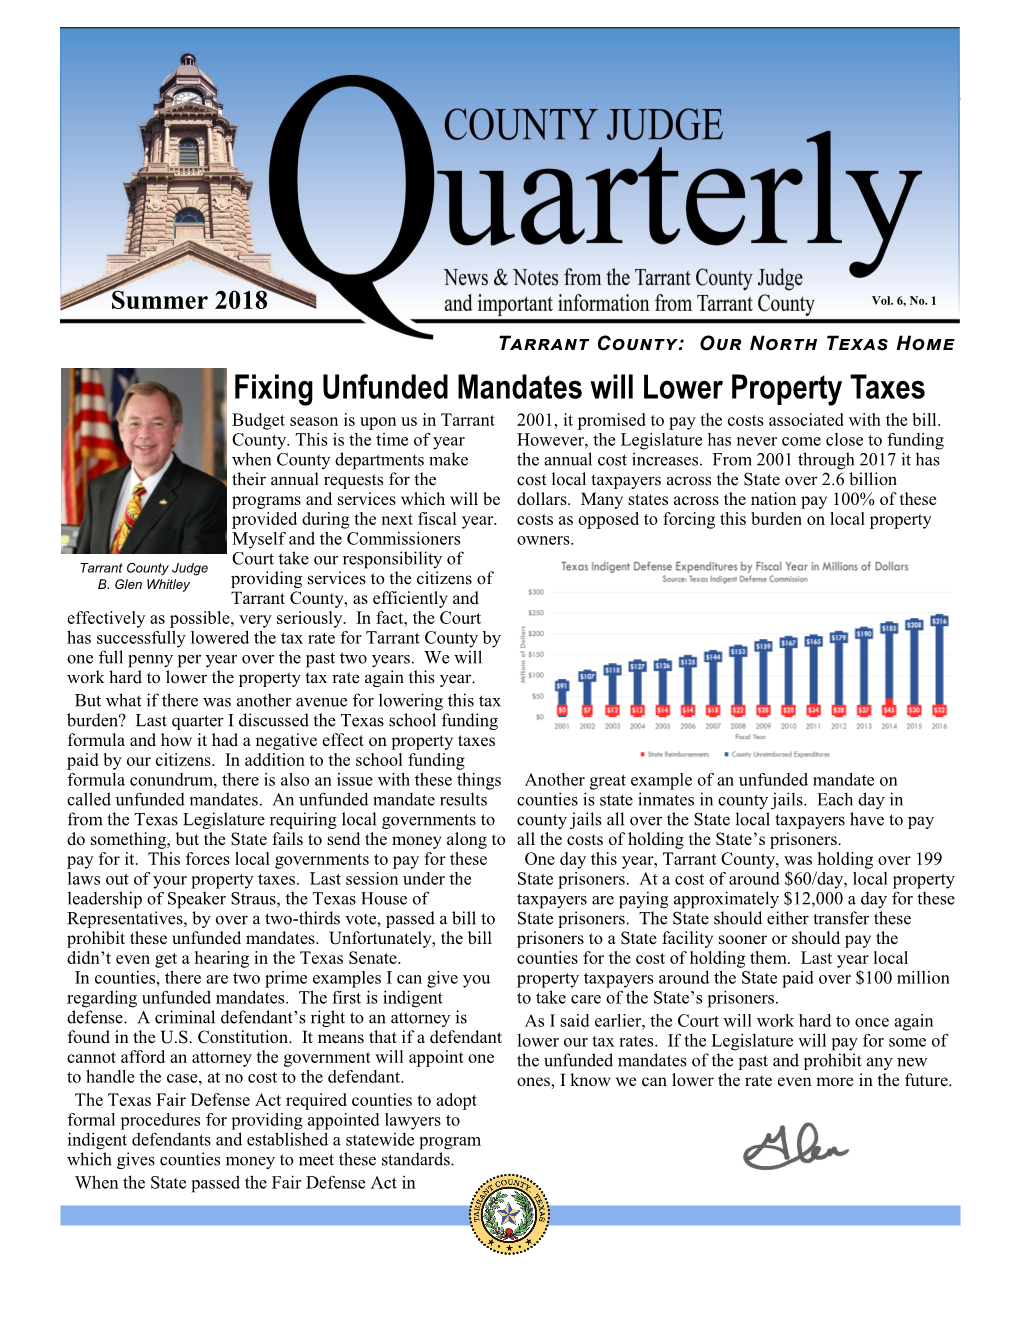 Fixing Unfunded Mandates Will Lower Property Taxes Budget Season Is Upon Us in Tarrant 2001, It Promised to Pay the Costs Associated with the Bill